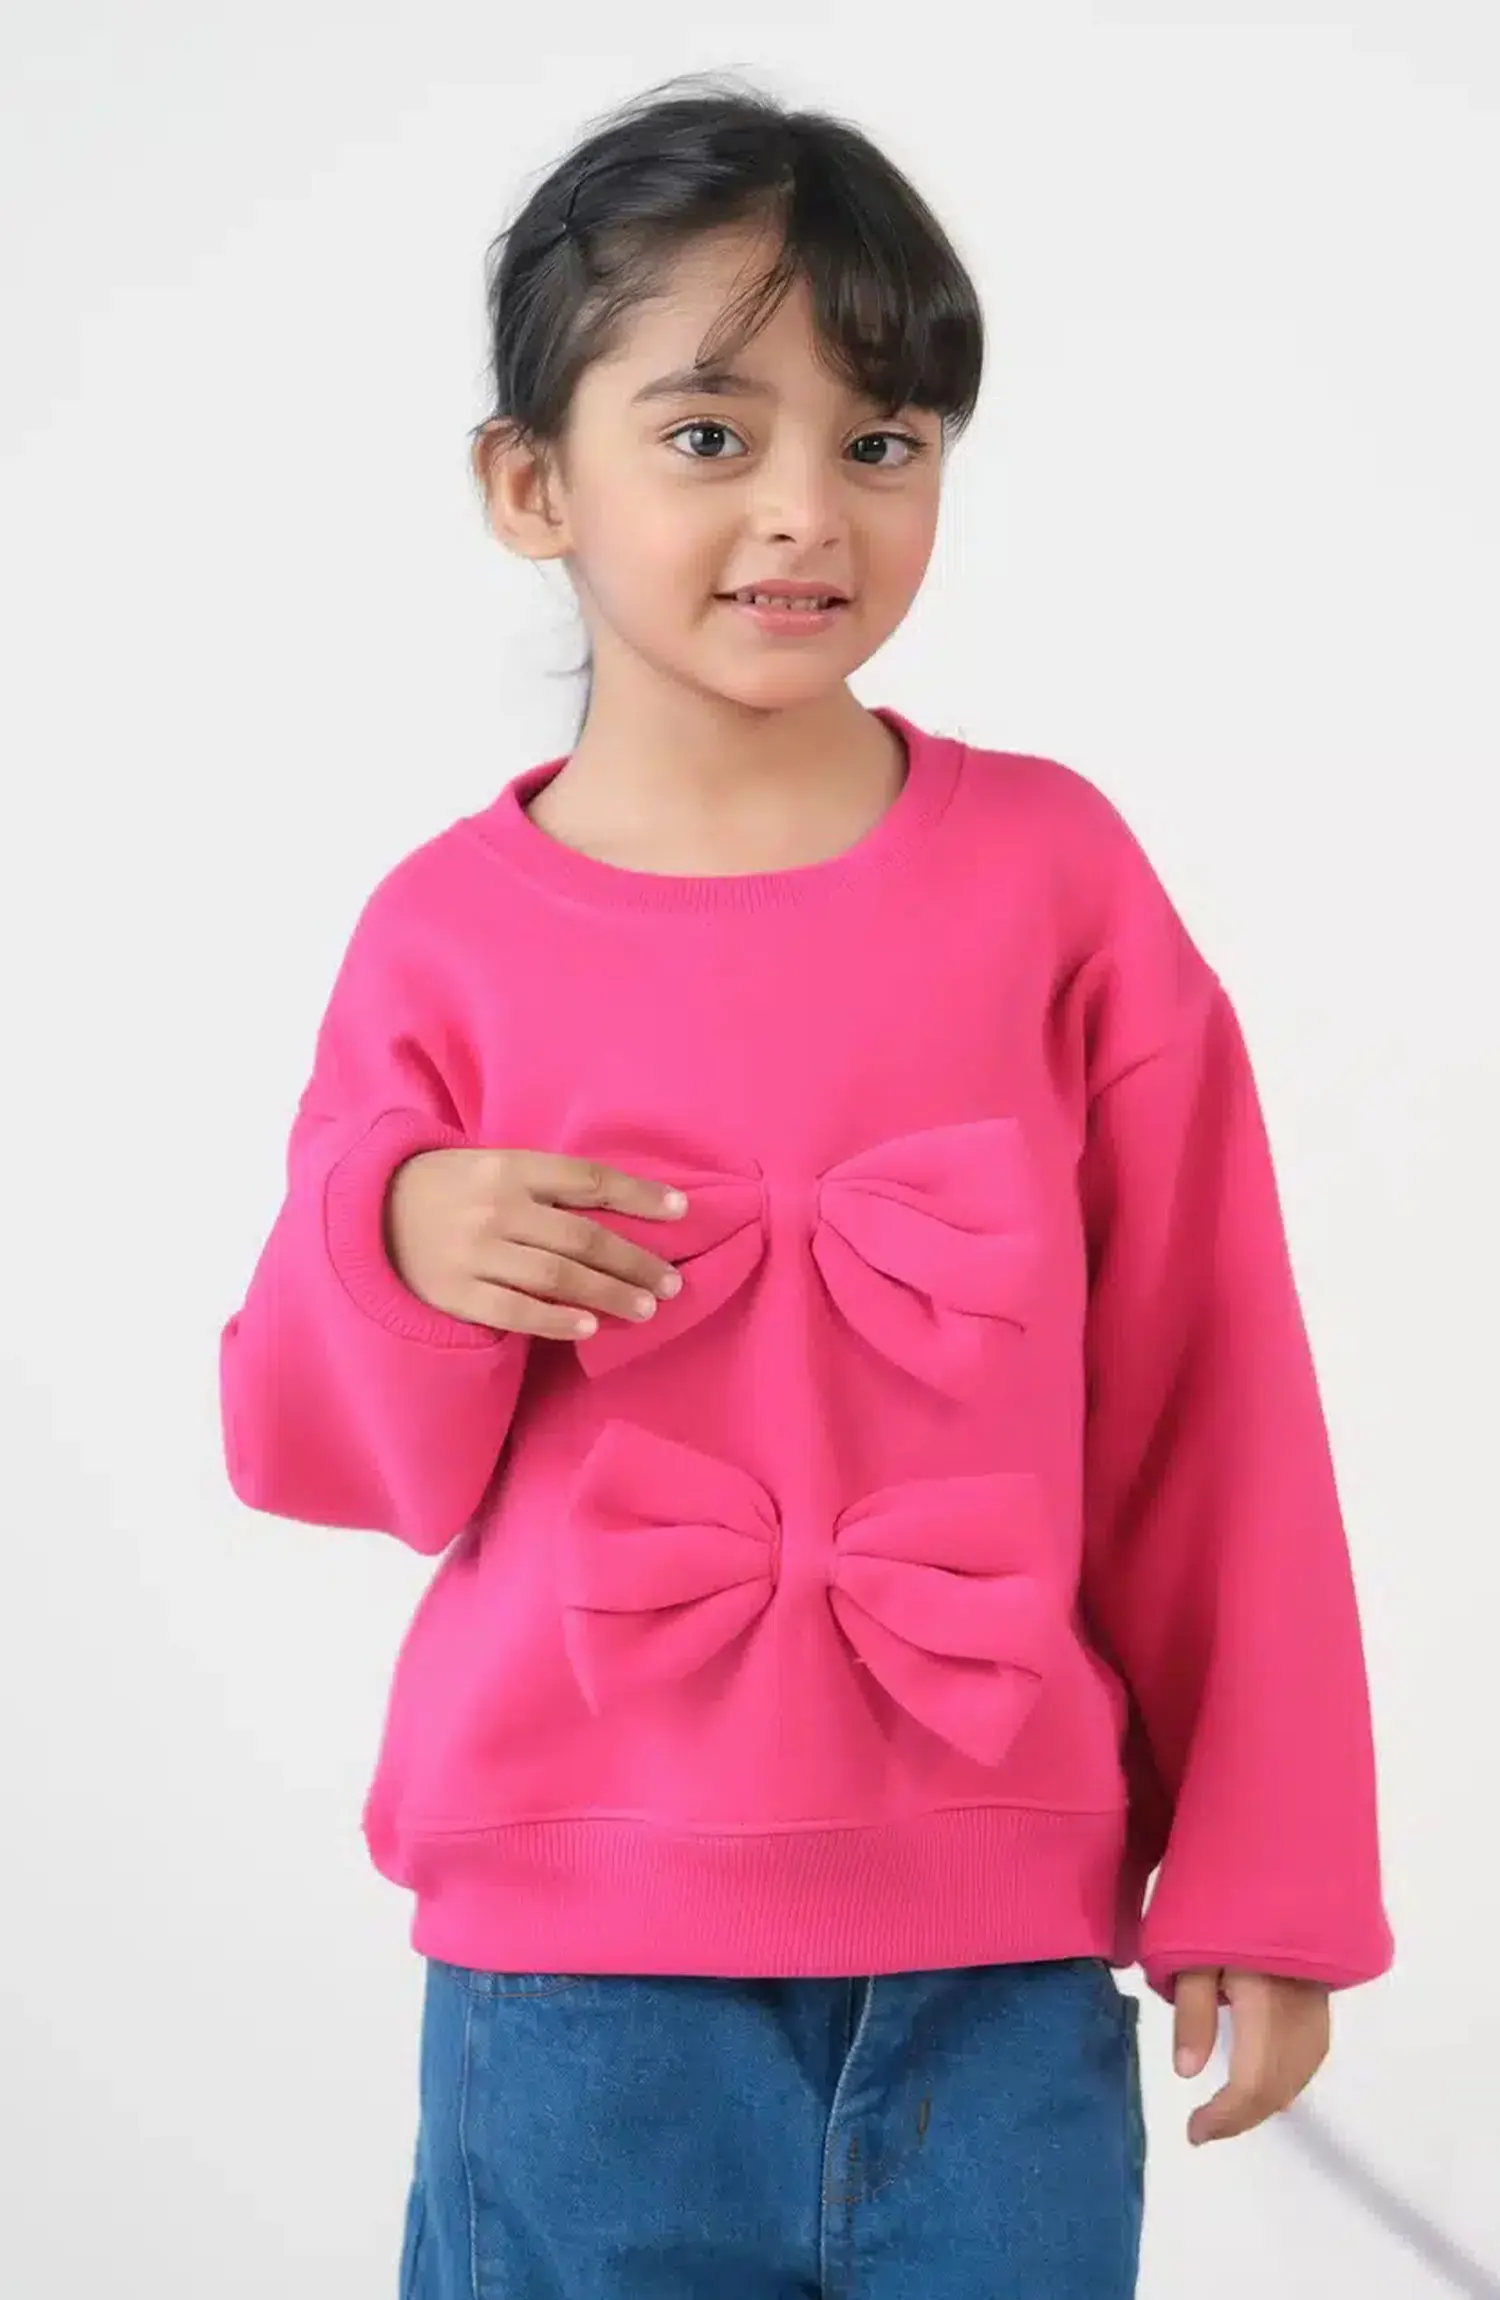 Sprinkles Kids Winter Collection - Bow Charm Sweatshirt – Hot Pink